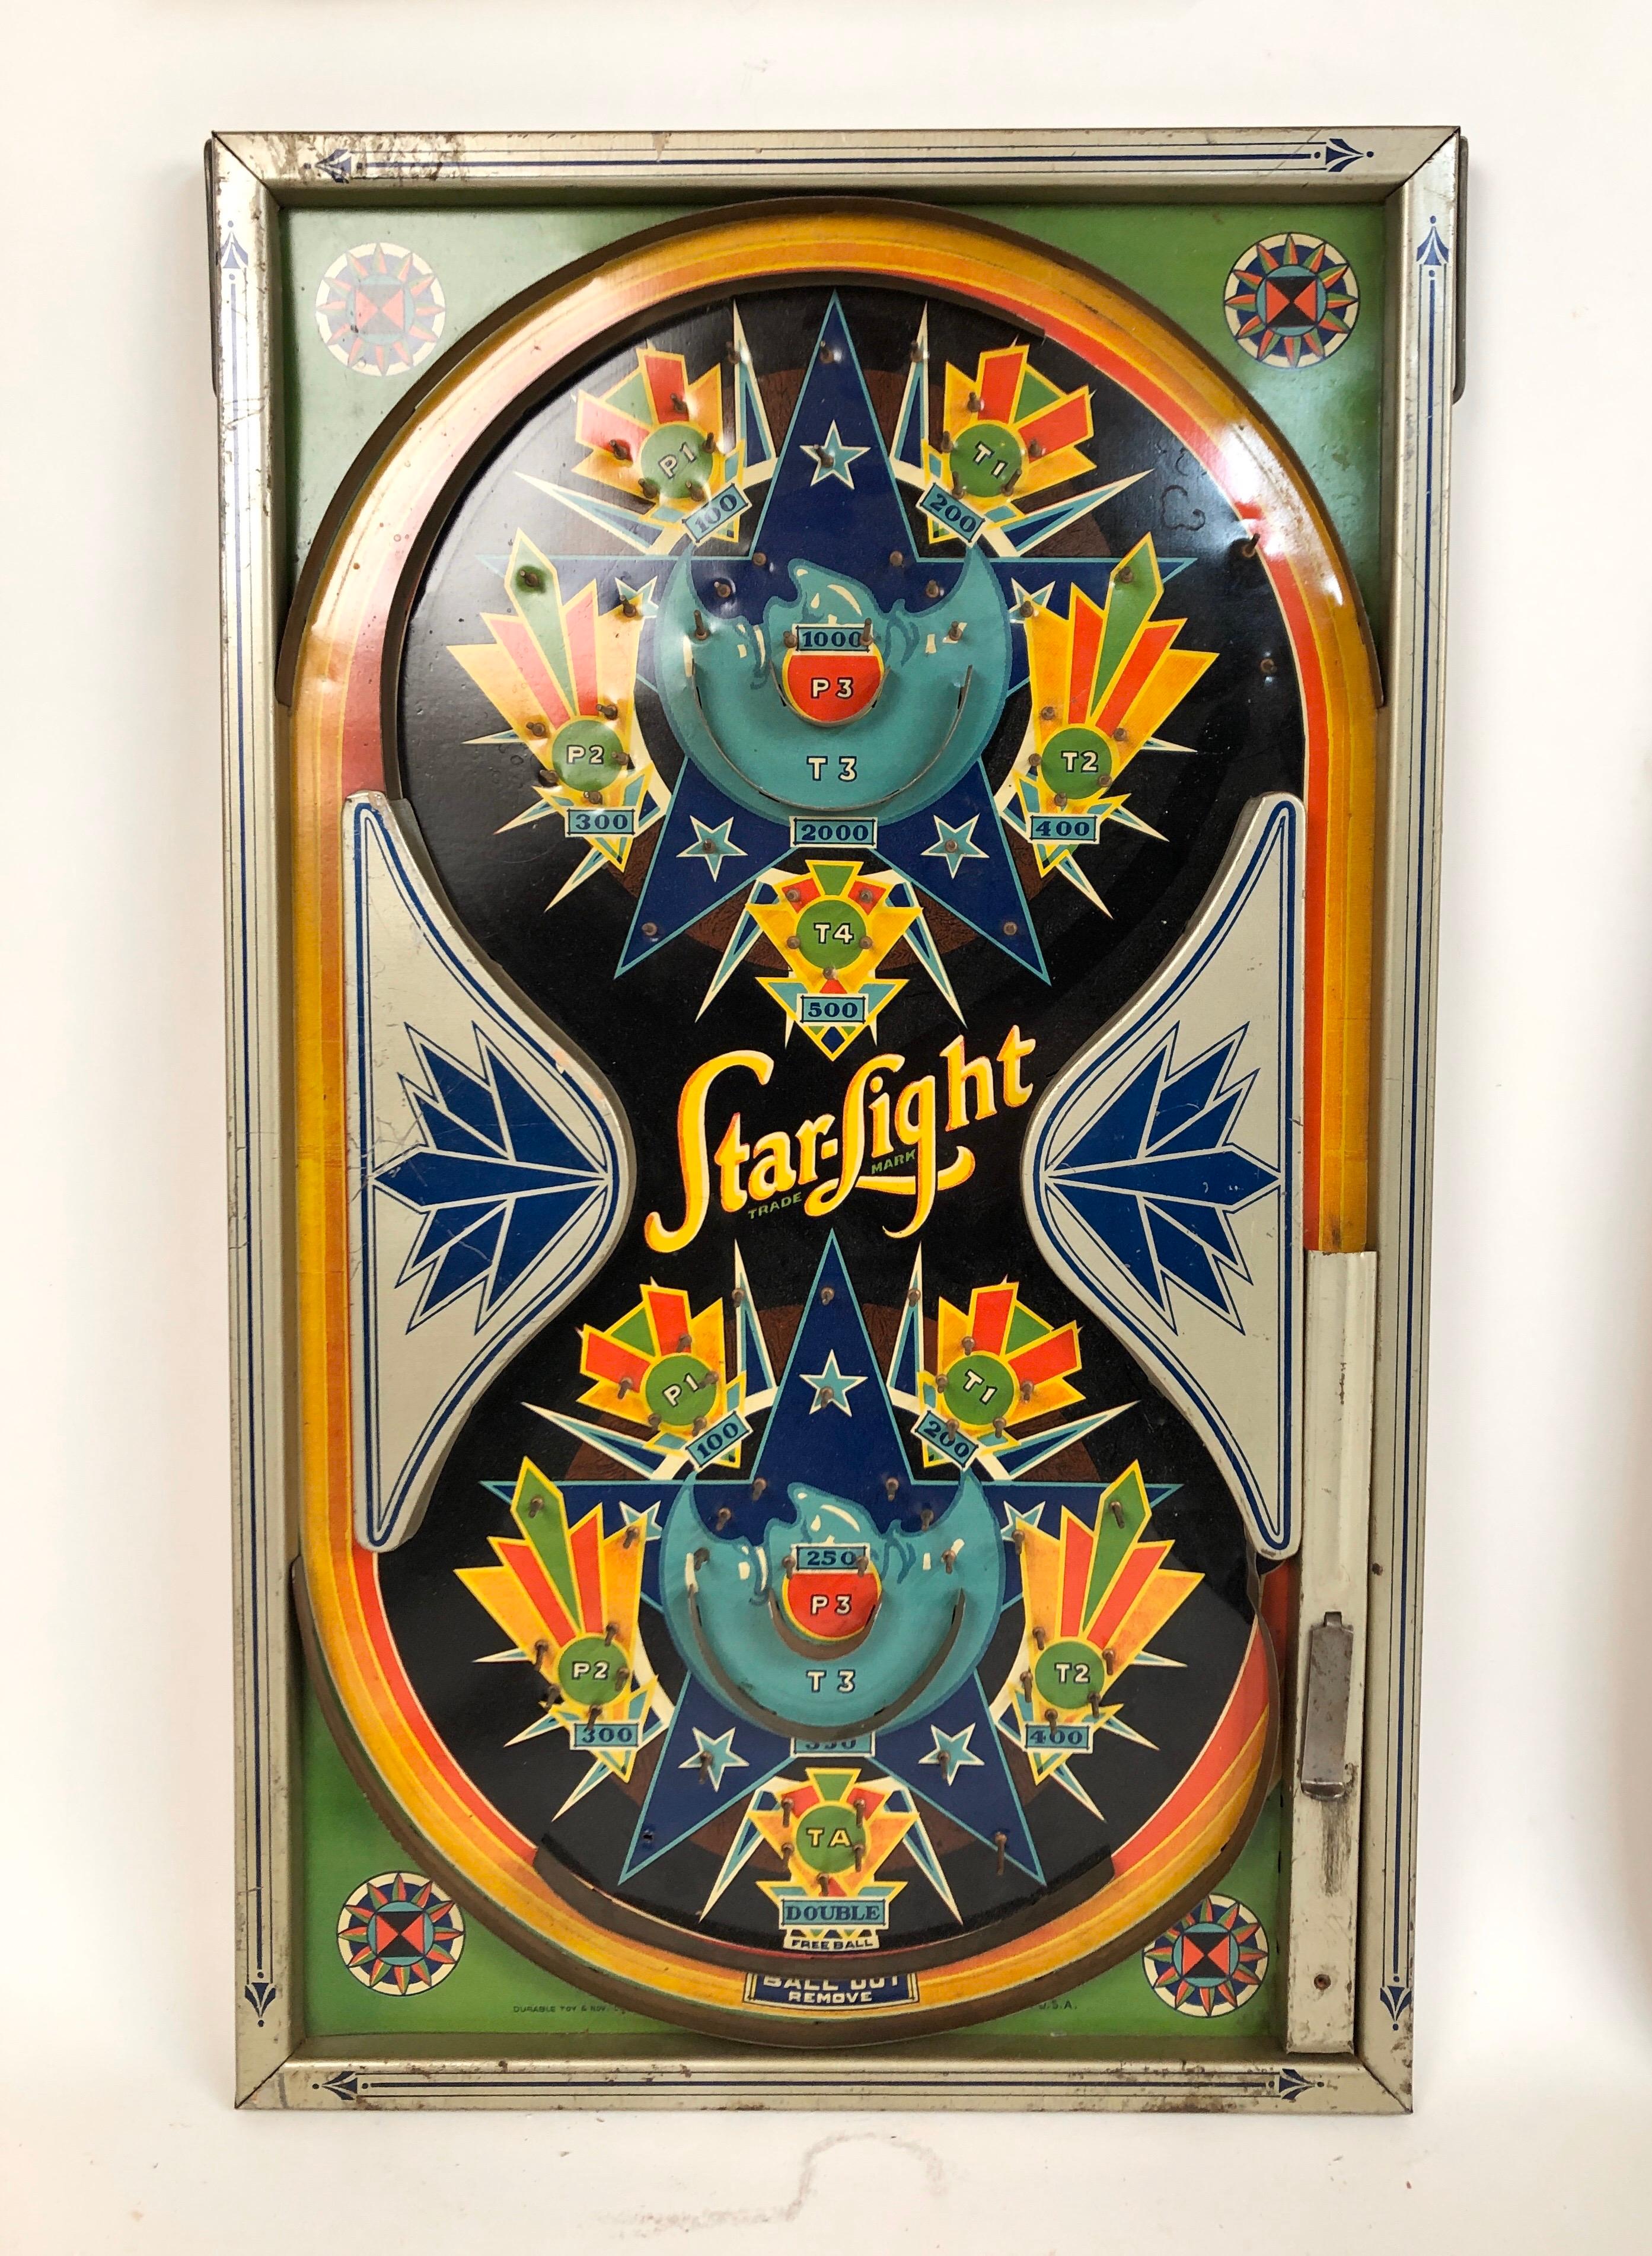 A collection of 6 very nice antique table top pinball games, circa 1920-1940. Extremely graphic and vibrant. They measure 14